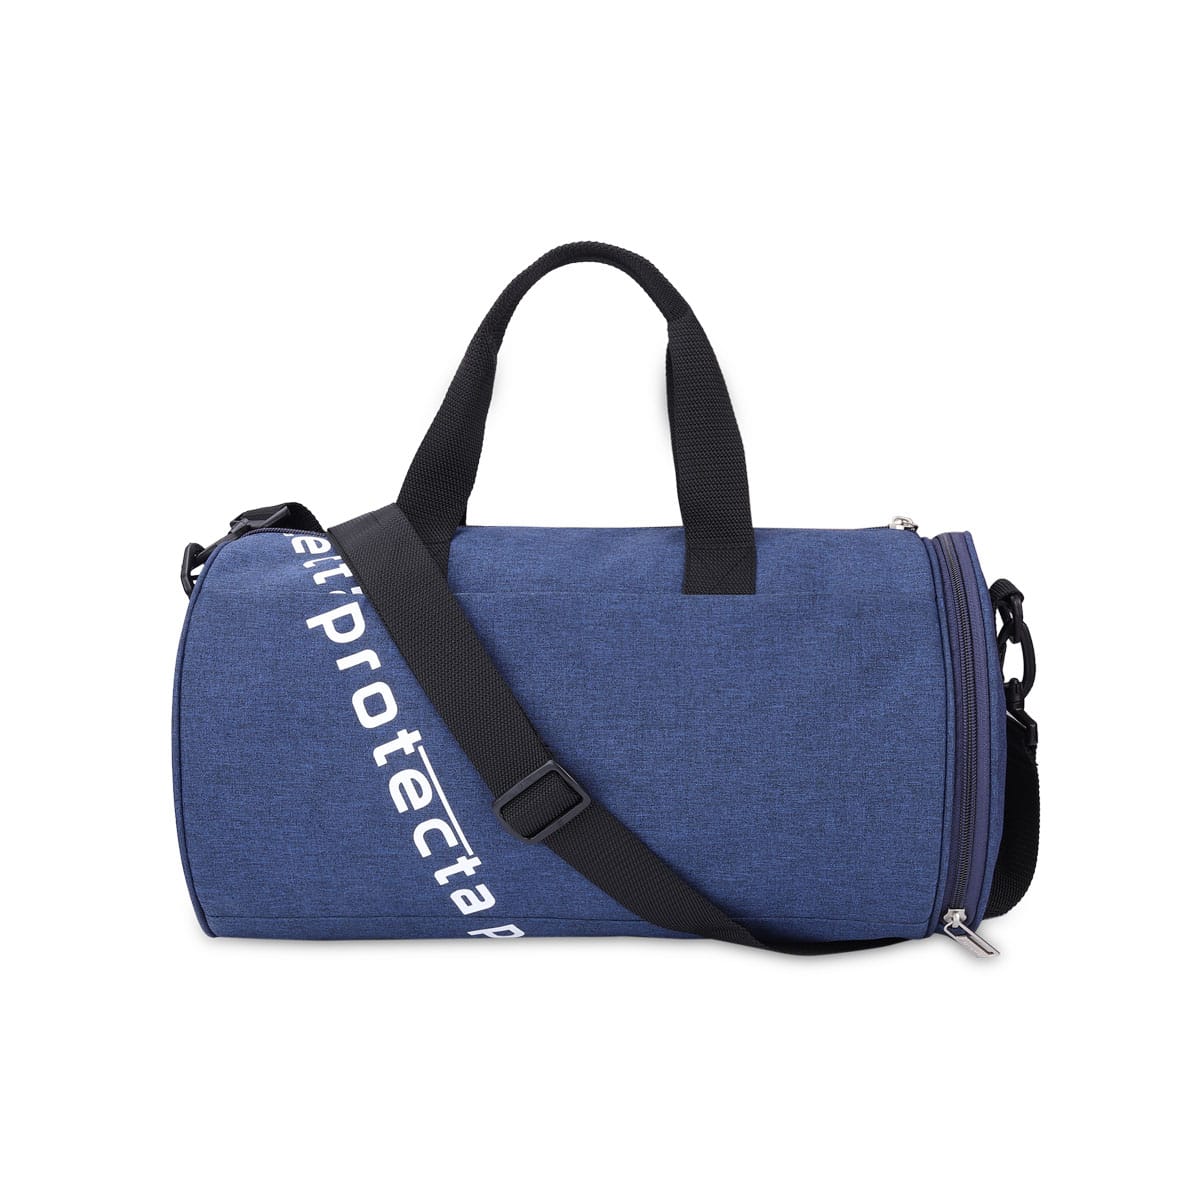 Small Gym Bag Women with Internal Pockets - Sand | Oner Active UK